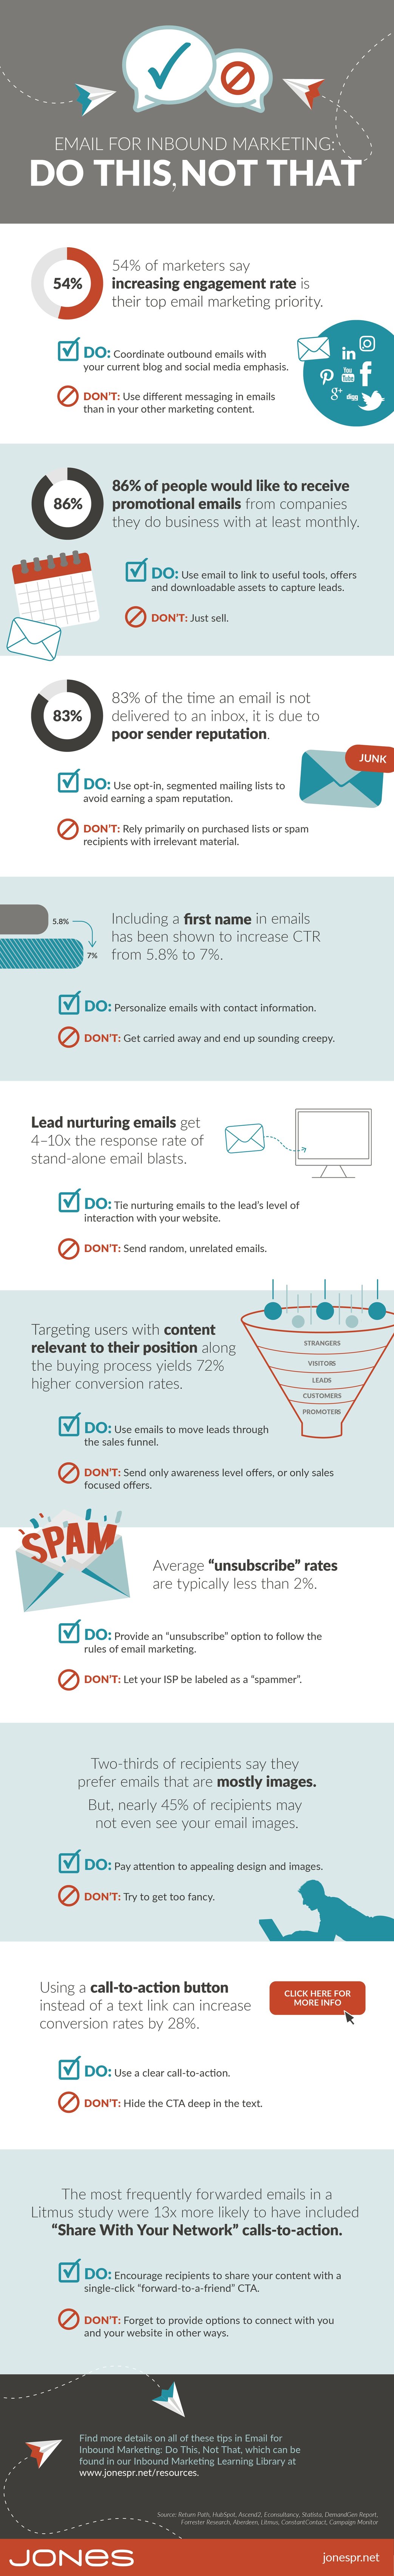 jones-infographic-email-this-not-that-01